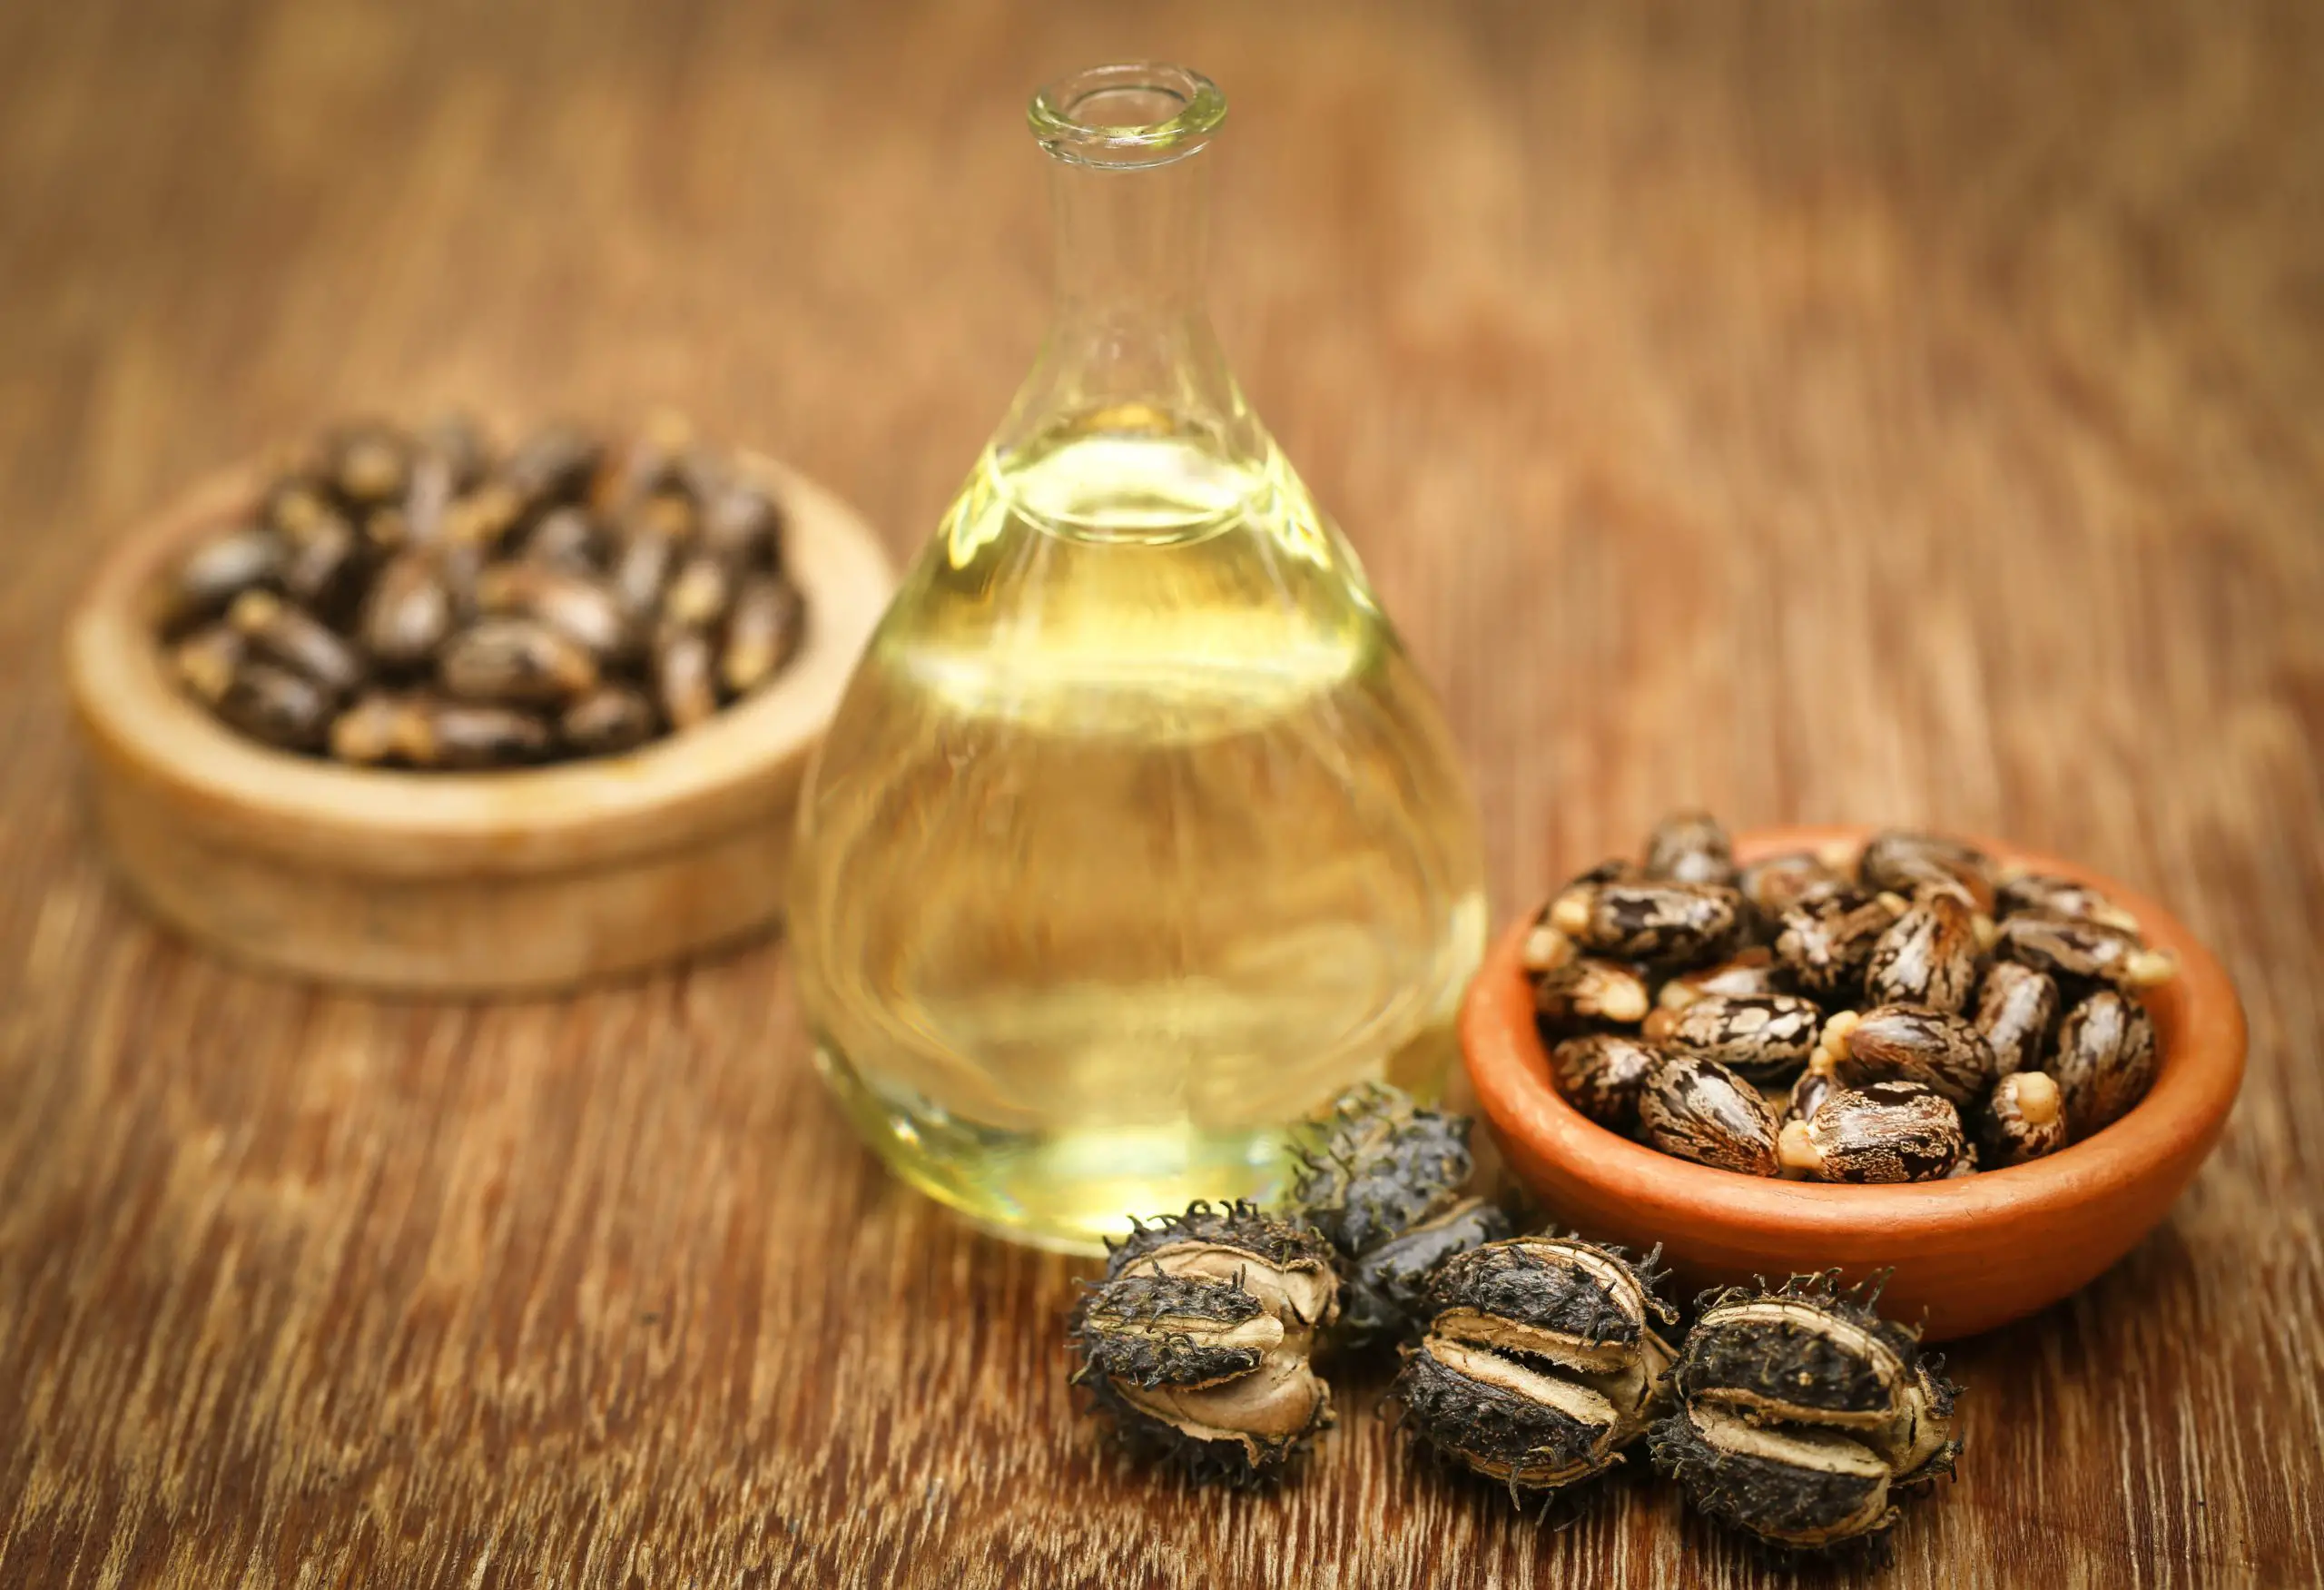 Organic Castor Oil for Hair Loss: Does it Help with Hair Regrowth?